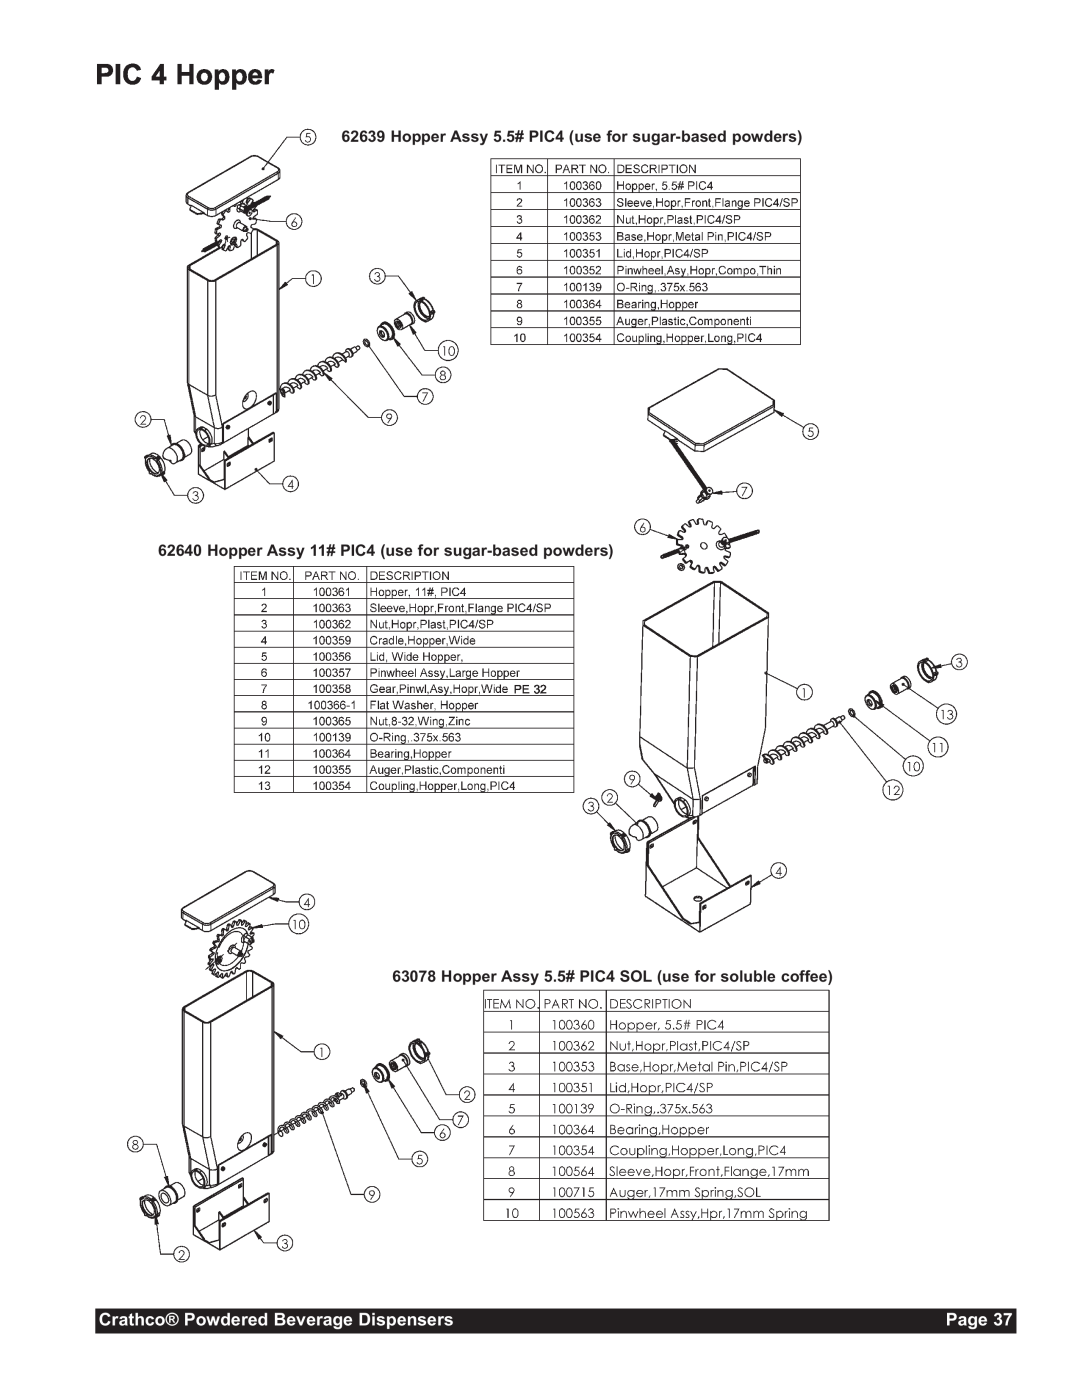 Grindmaster CC-302-20 service manual PIC 4 Hopper, Crathco Powdered Beverage Dispensers, Page 